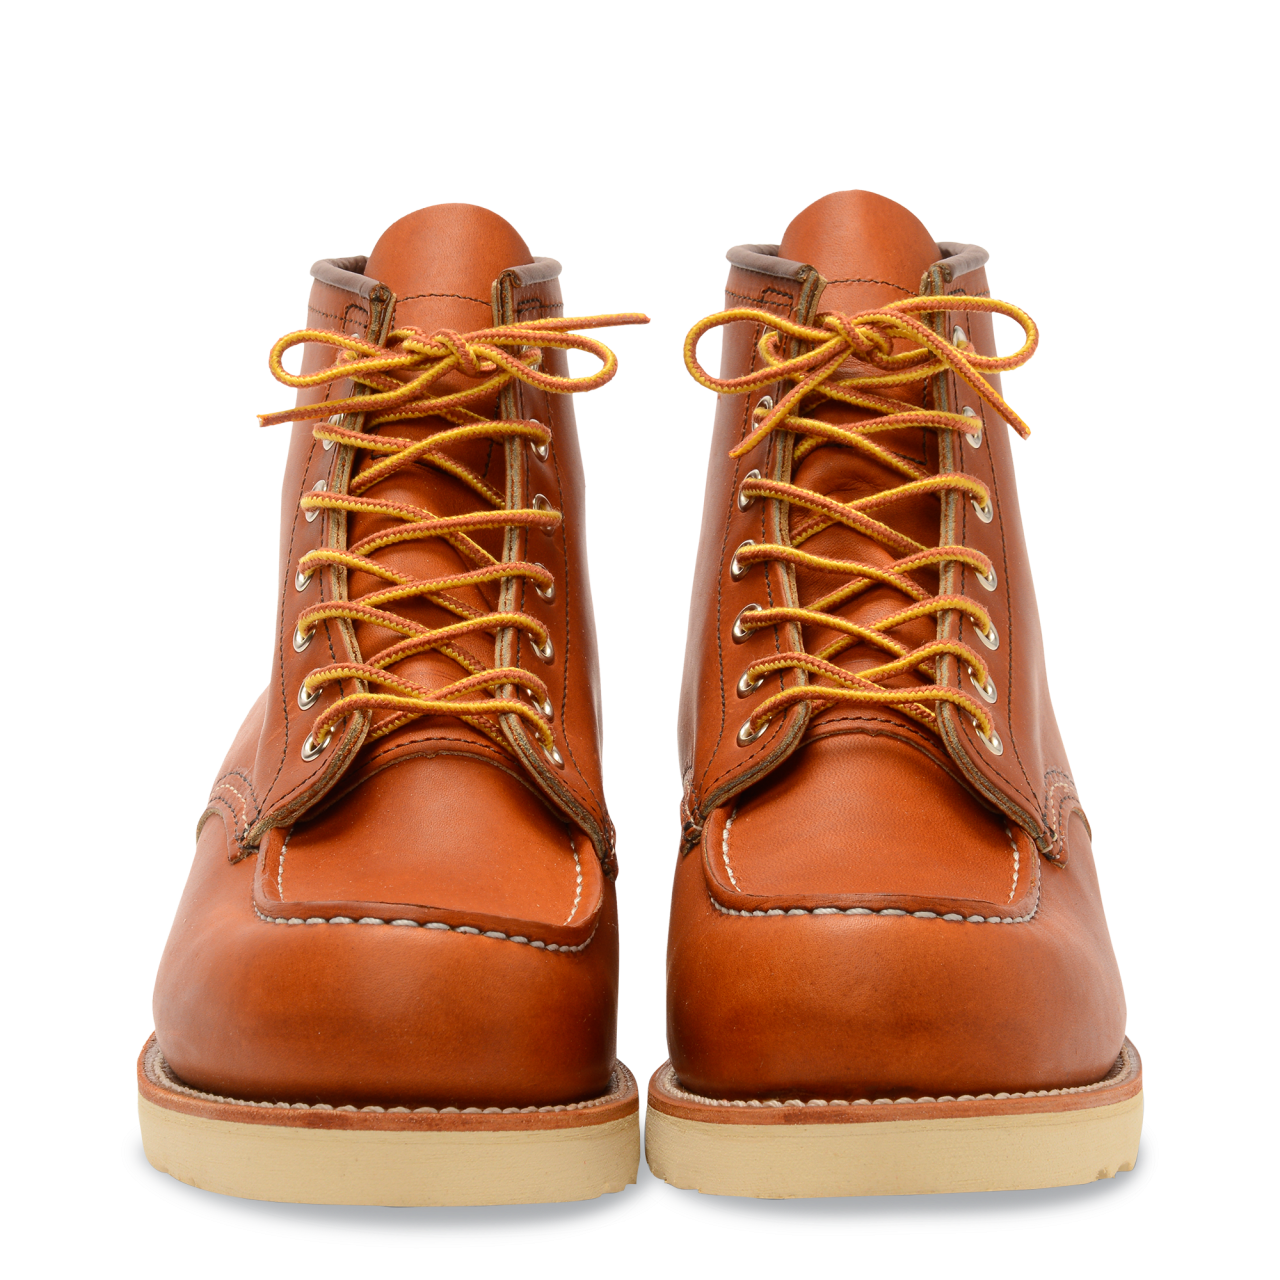 Red Wing 875 Moc Toe D